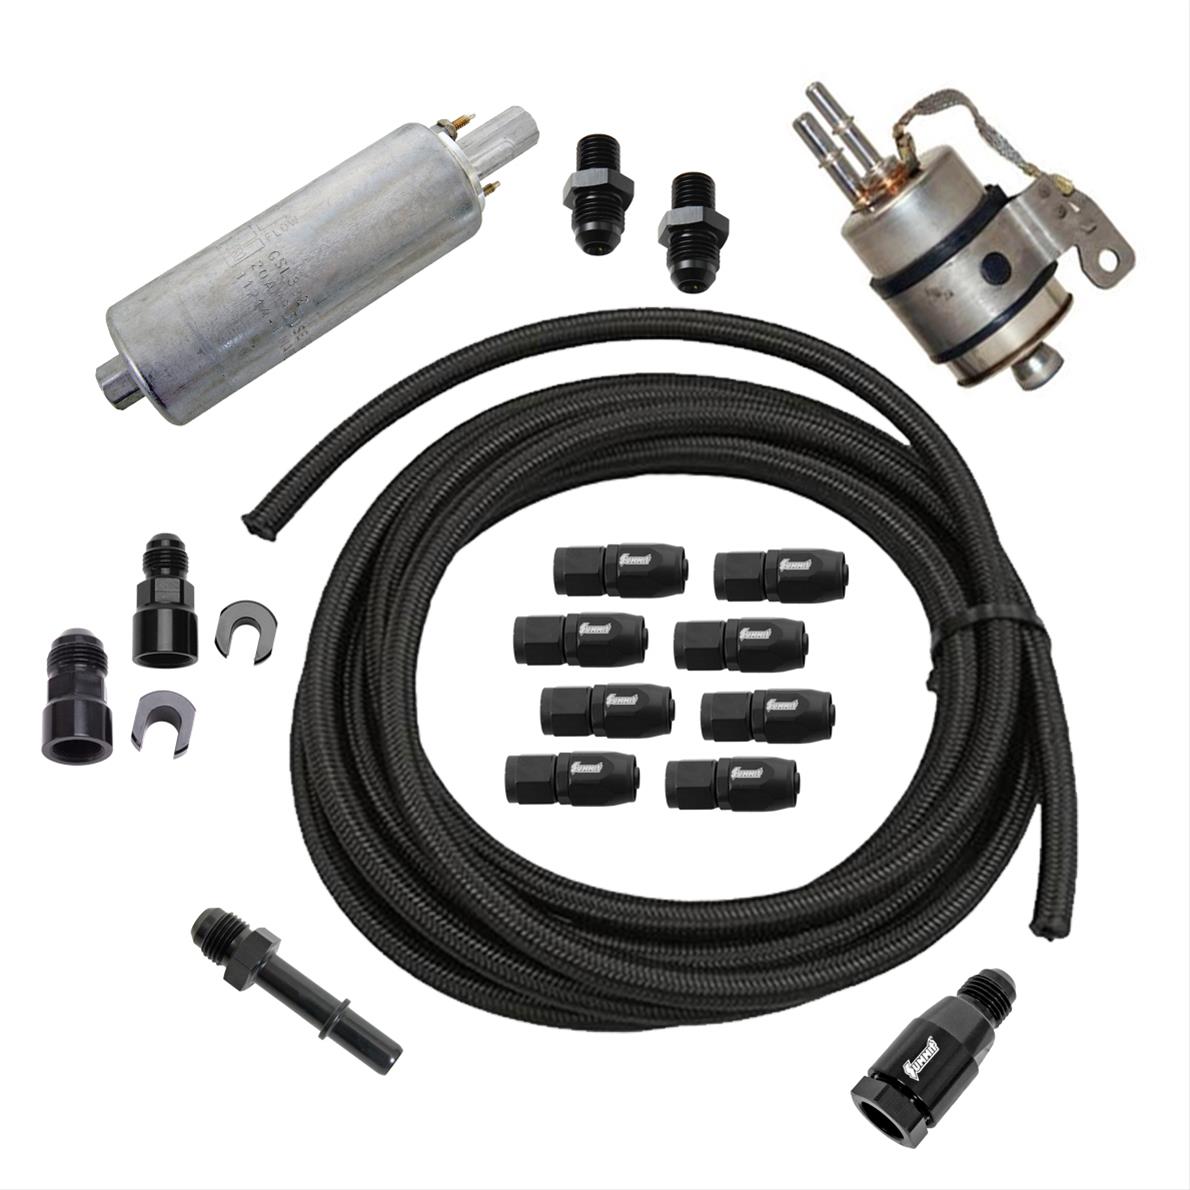 Summit Racing 03-0261 Summit Racing™ Universal LS-Style Fuel Systems